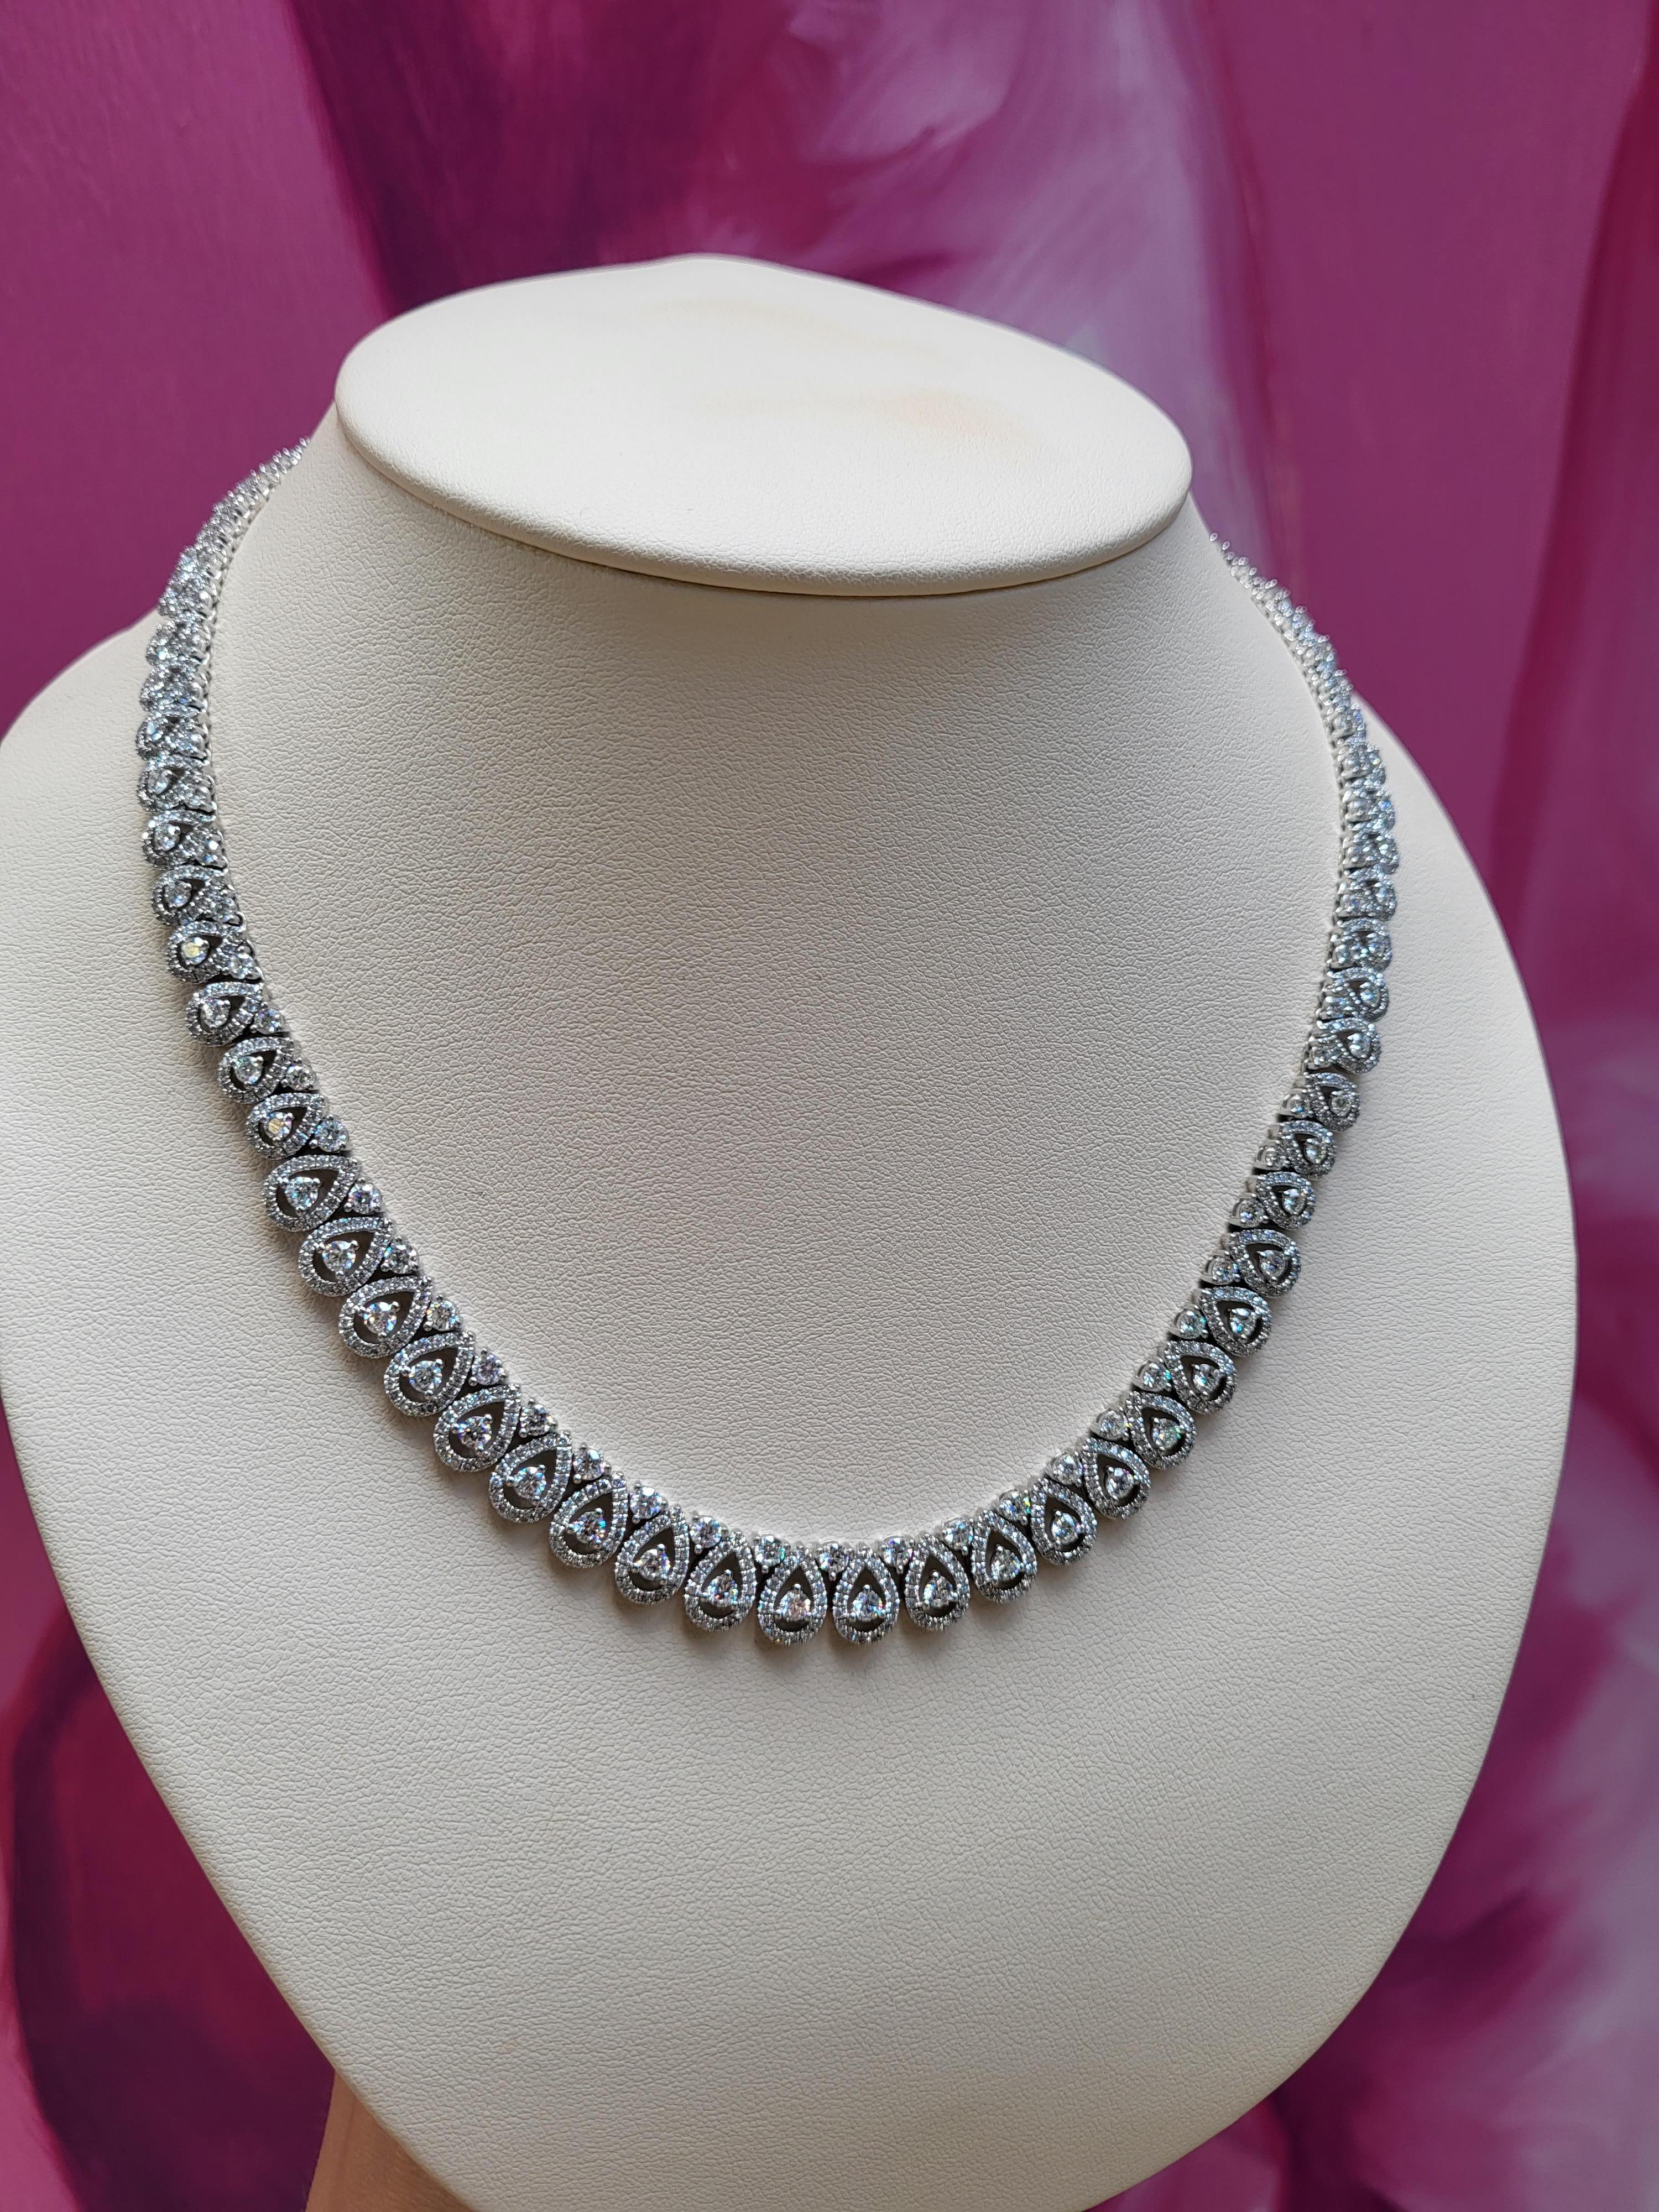 18 Karat White Gold 17.64 Carat Total Weight Pear Shaped Diamond Halo Necklace In New Condition For Sale In Houston, TX